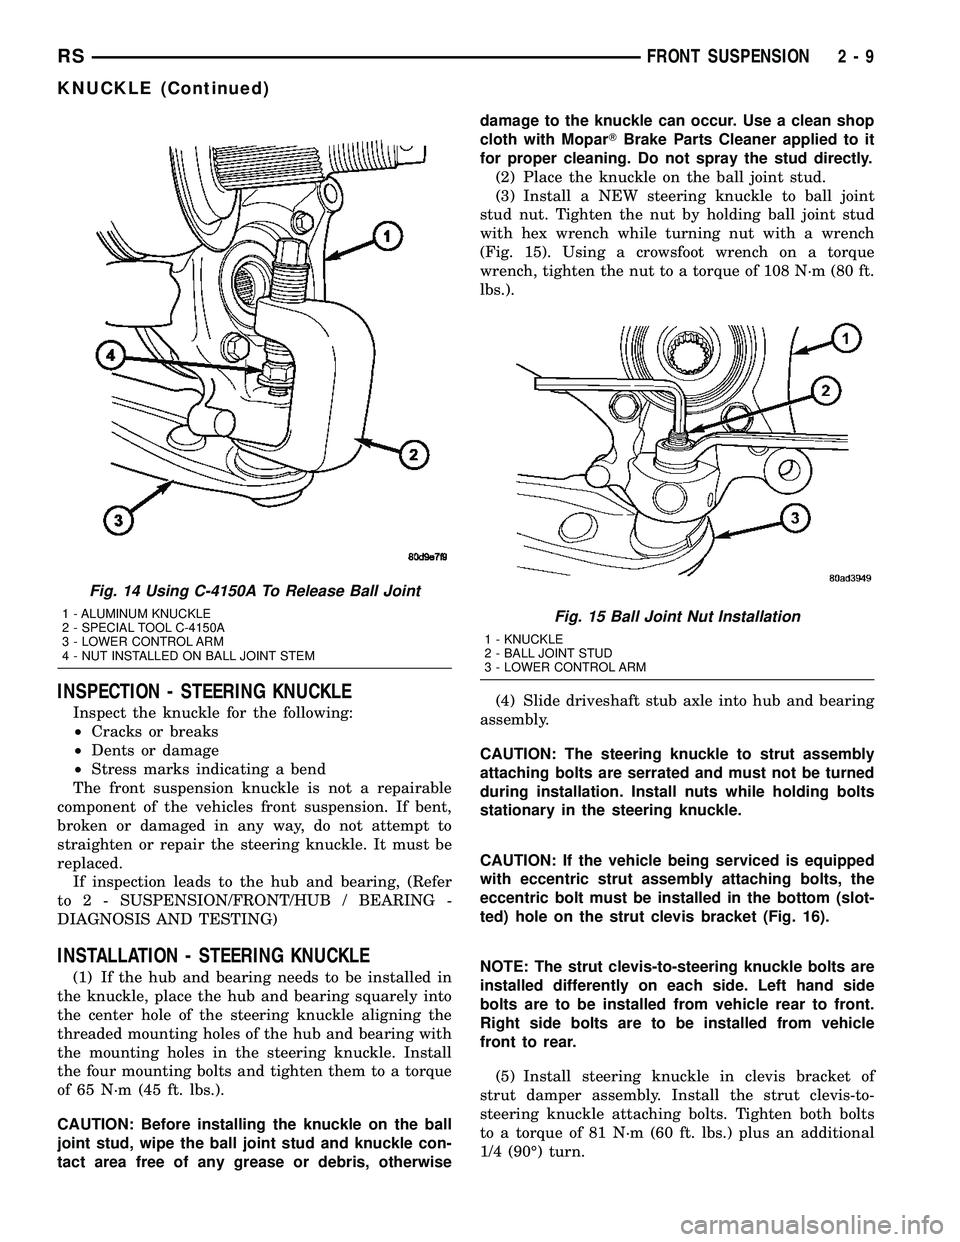 CHRYSLER CARAVAN 2005 Workshop Manual INSPECTION - STEERING KNUCKLE
Inspect the knuckle for the following:
²Cracks or breaks
²Dents or damage
²Stress marks indicating a bend
The front suspension knuckle is not a repairable
component of